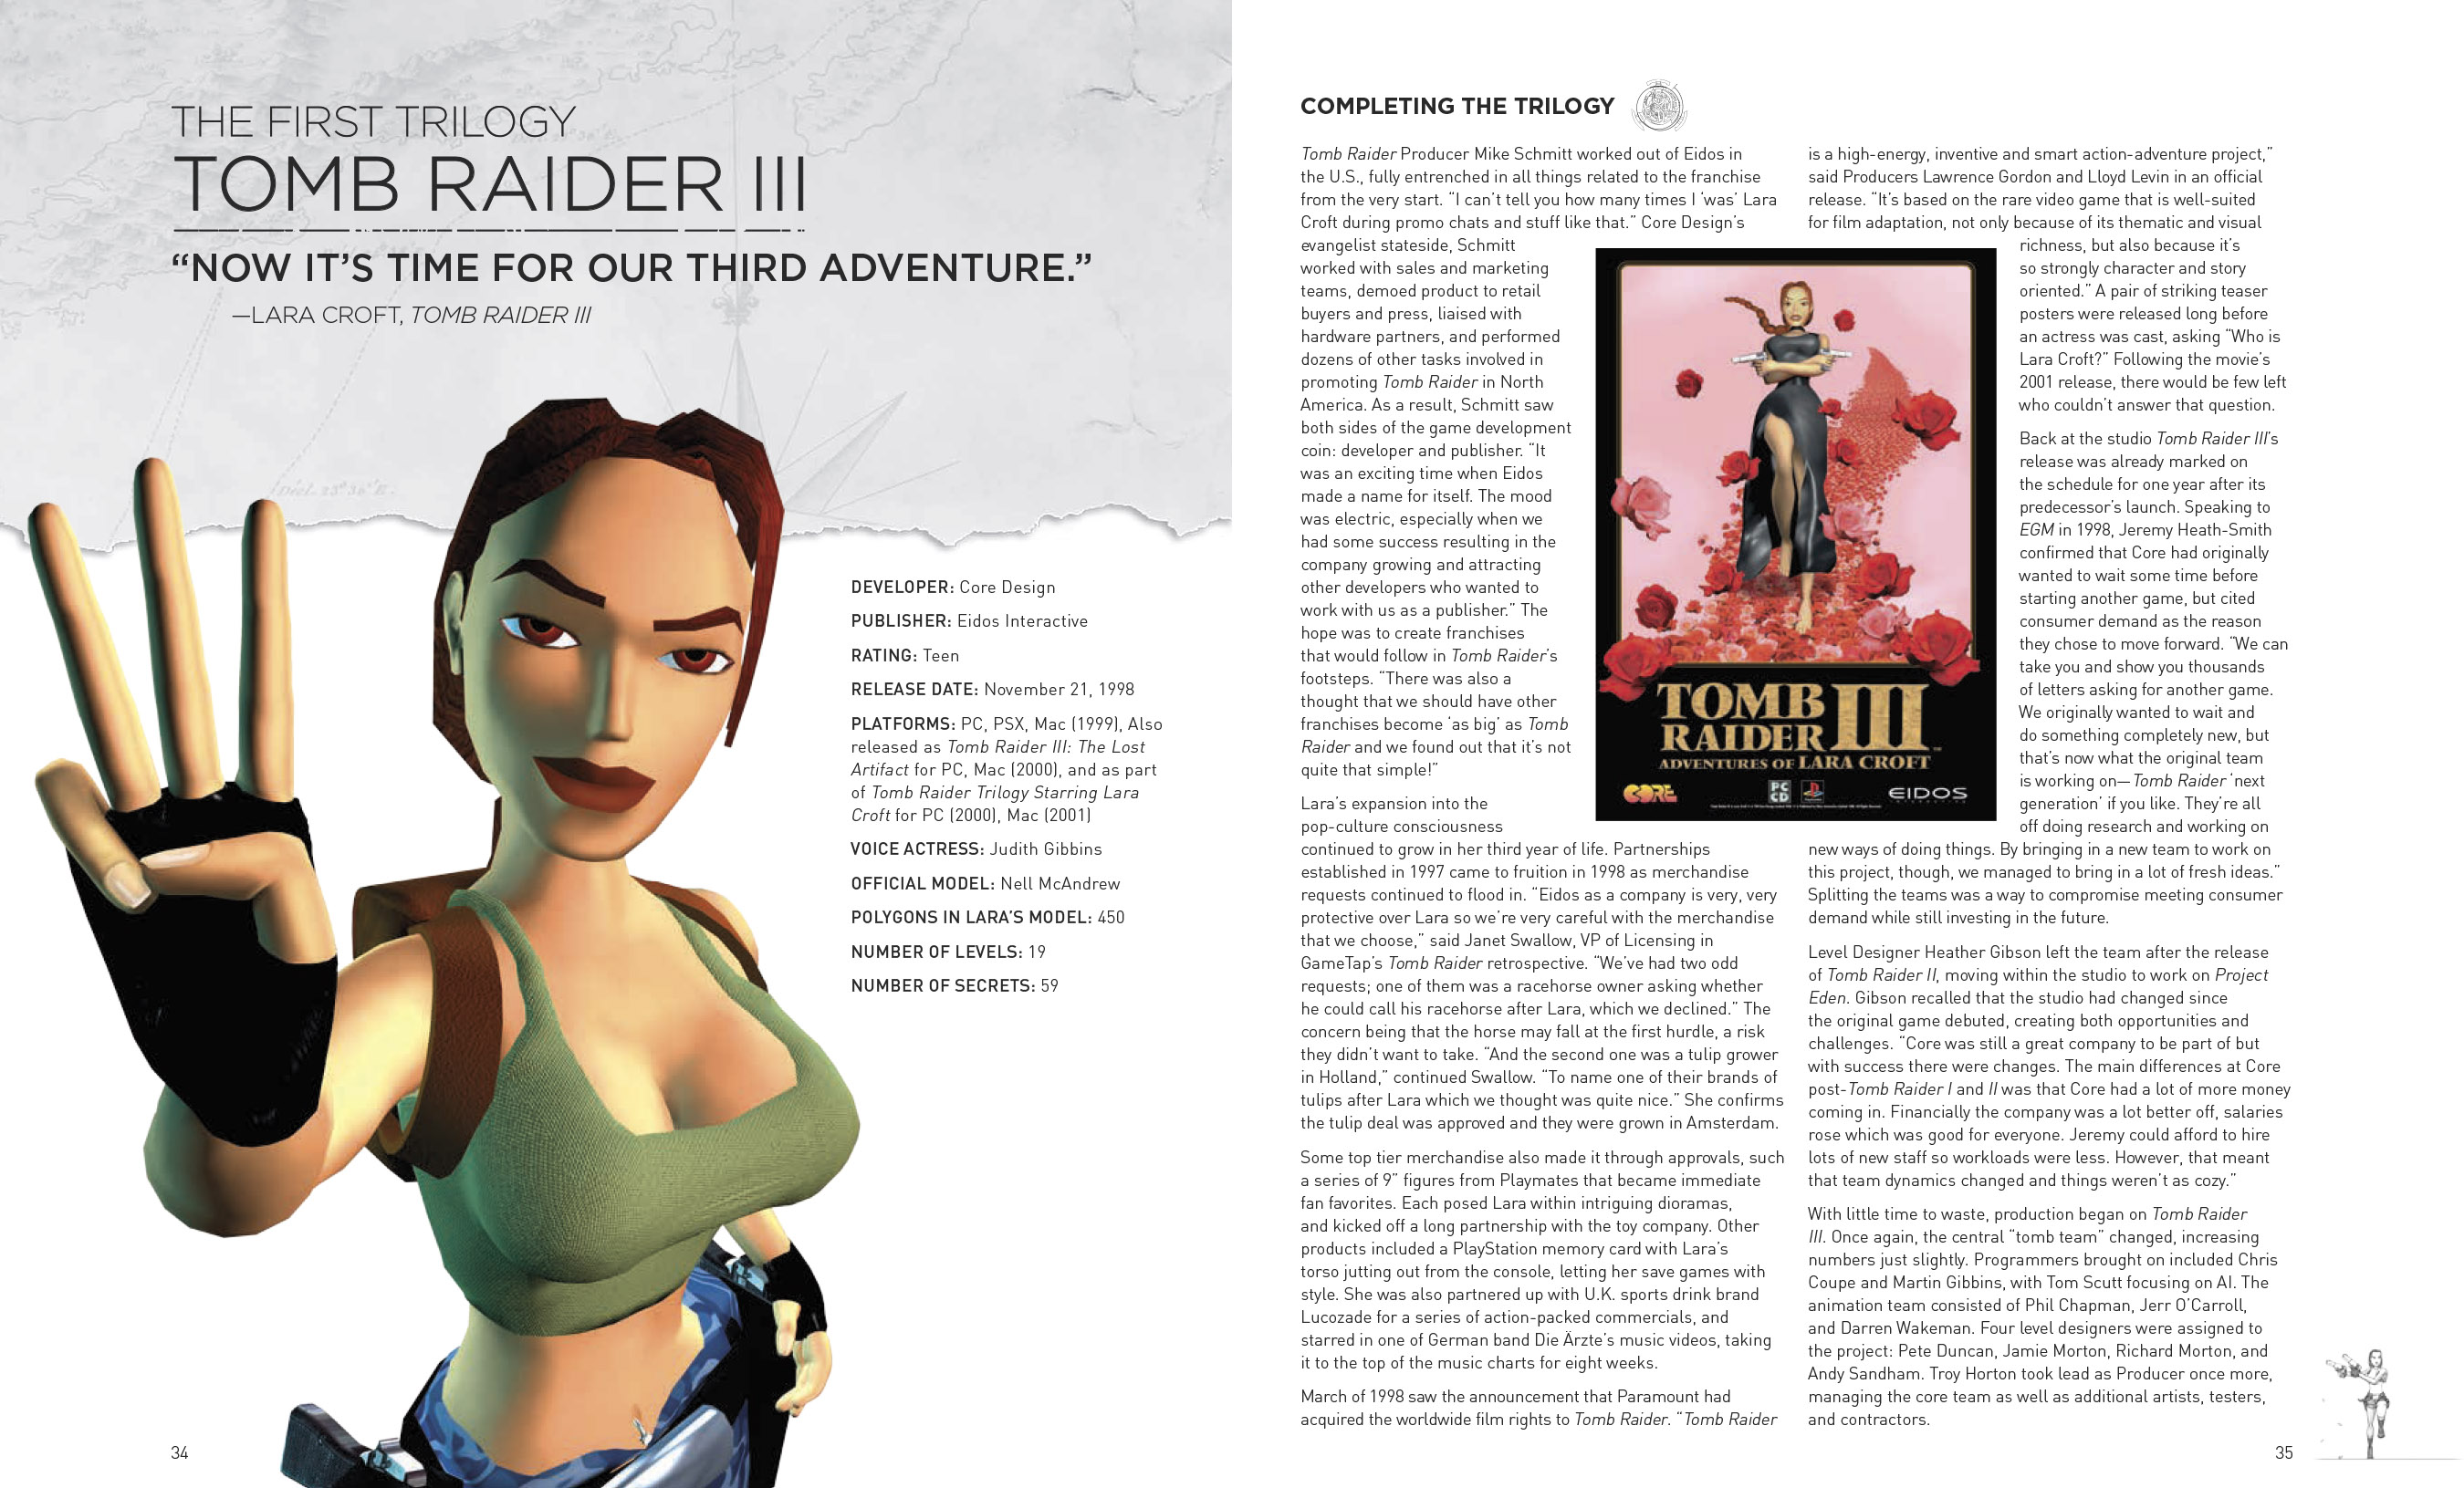 20 Years of Tomb Raider preview